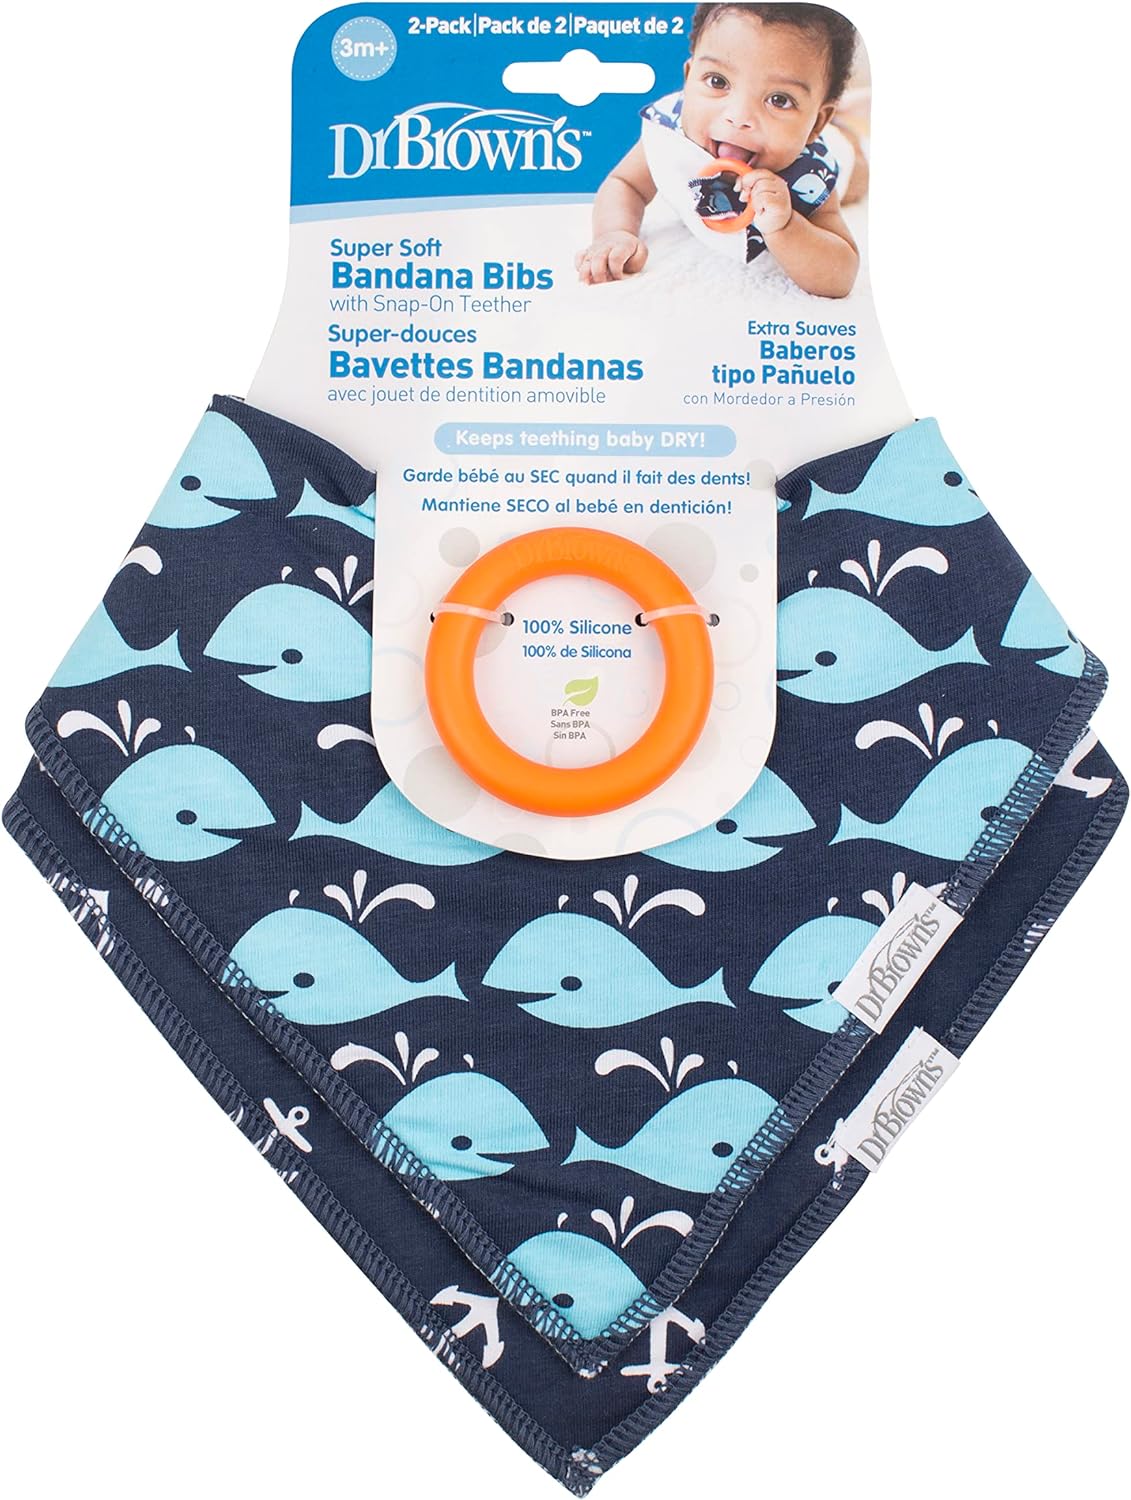 Dr. Brown's Bandana Bib With Teether - Anchors / Whales - Pack of 2